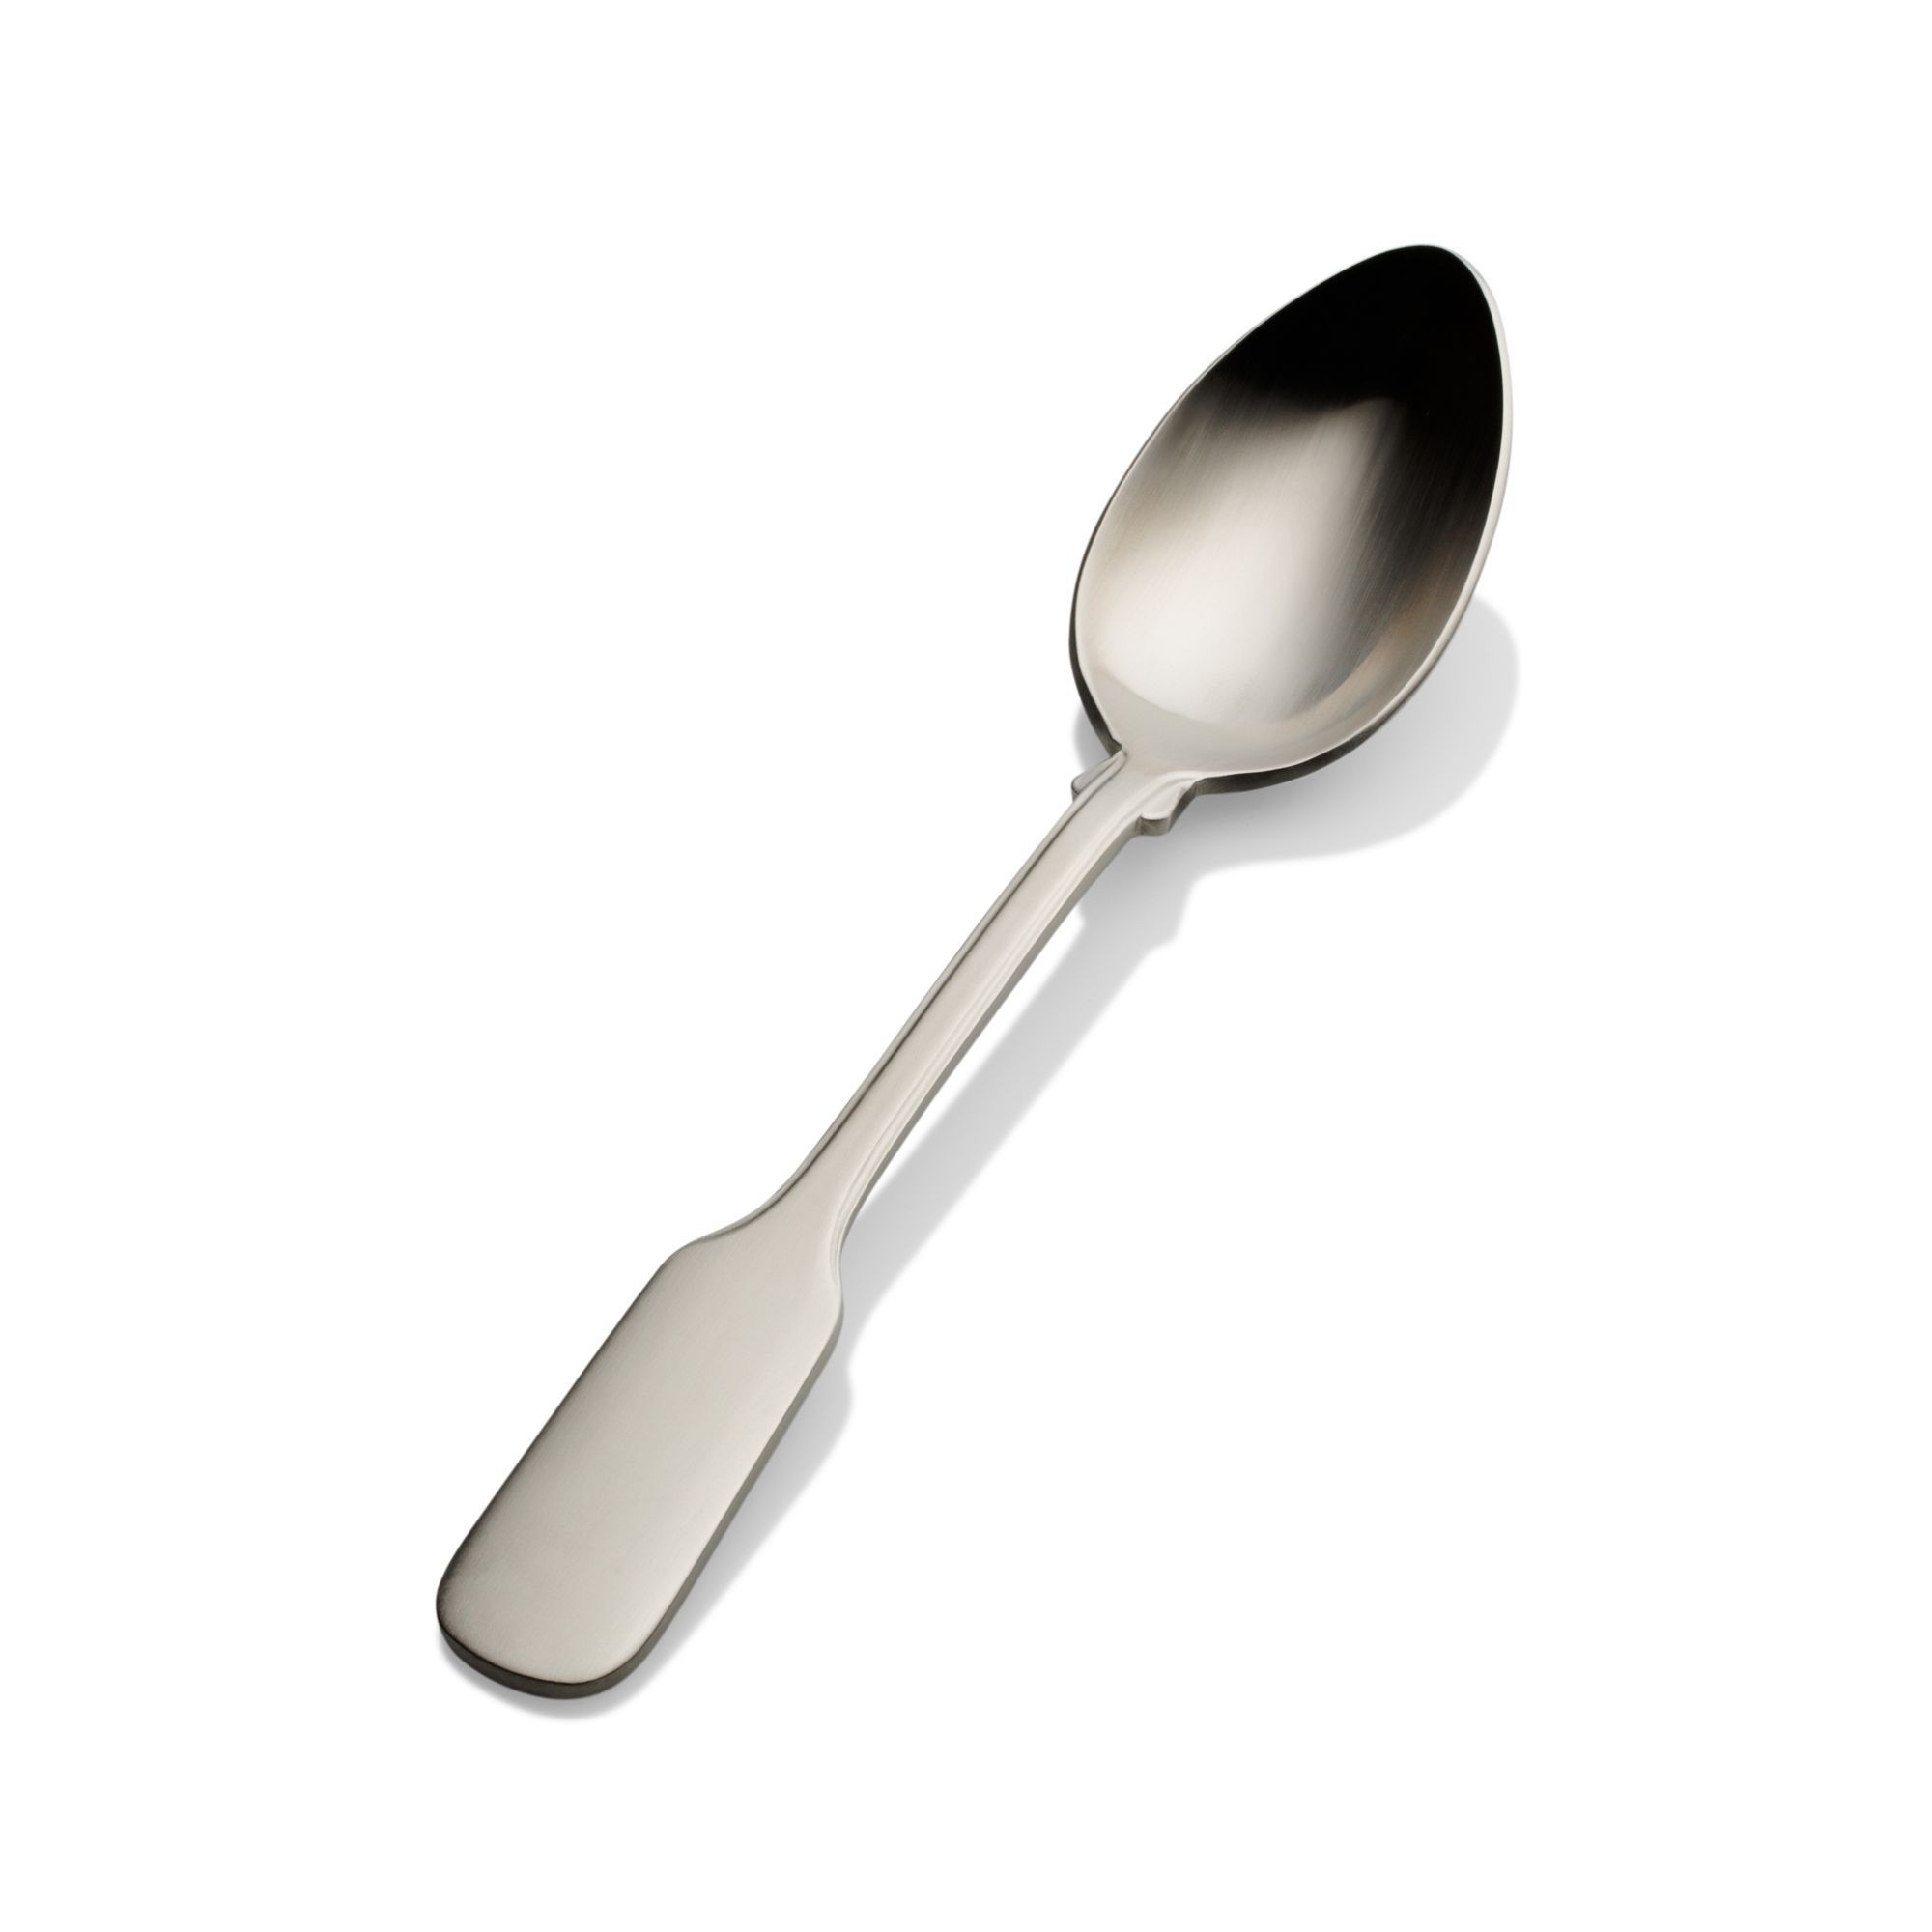 Bon Chef S1903S Liberty 18/8 Stainless Steel Silverplated Soup and Dessert Spoon